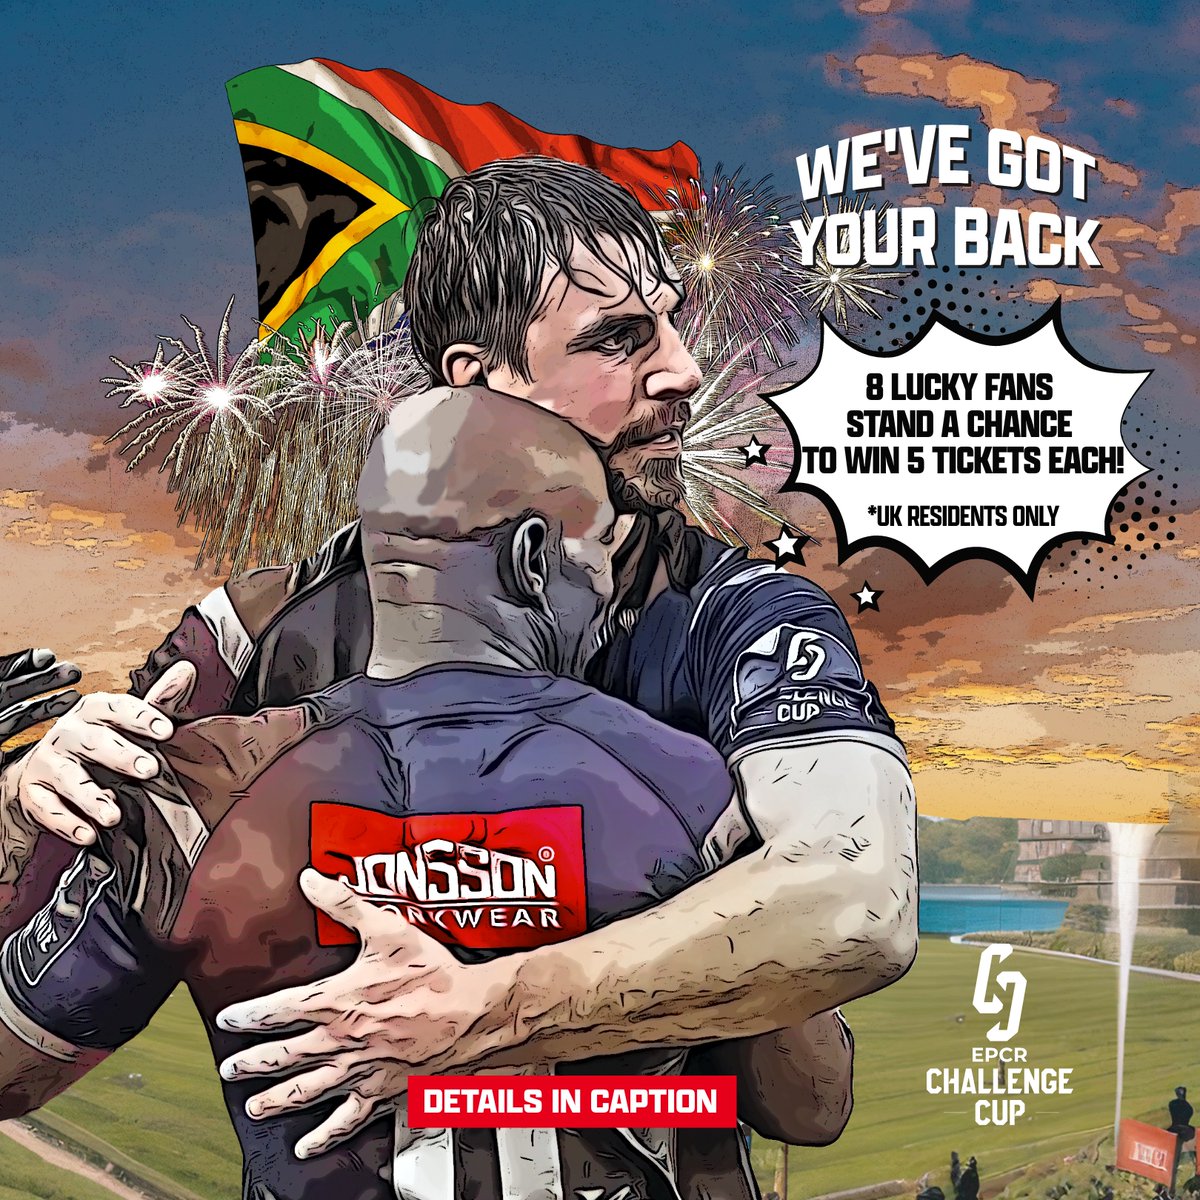 🇿🇦 CALLING ALL RUGBY FANS IN LONDON 🇿🇦

HOW TO ENTER.

1. Tag 4 SA rugby-loving fans or friends
2. Use the #OurStoep🇿🇦 , winners will be announced tomorrow at 13H00 BST.

Terms & Conditions:
- UK RESIDENTS ONLY.  
- Multiple entries are allowed.
- All competition T’s & C’s as…